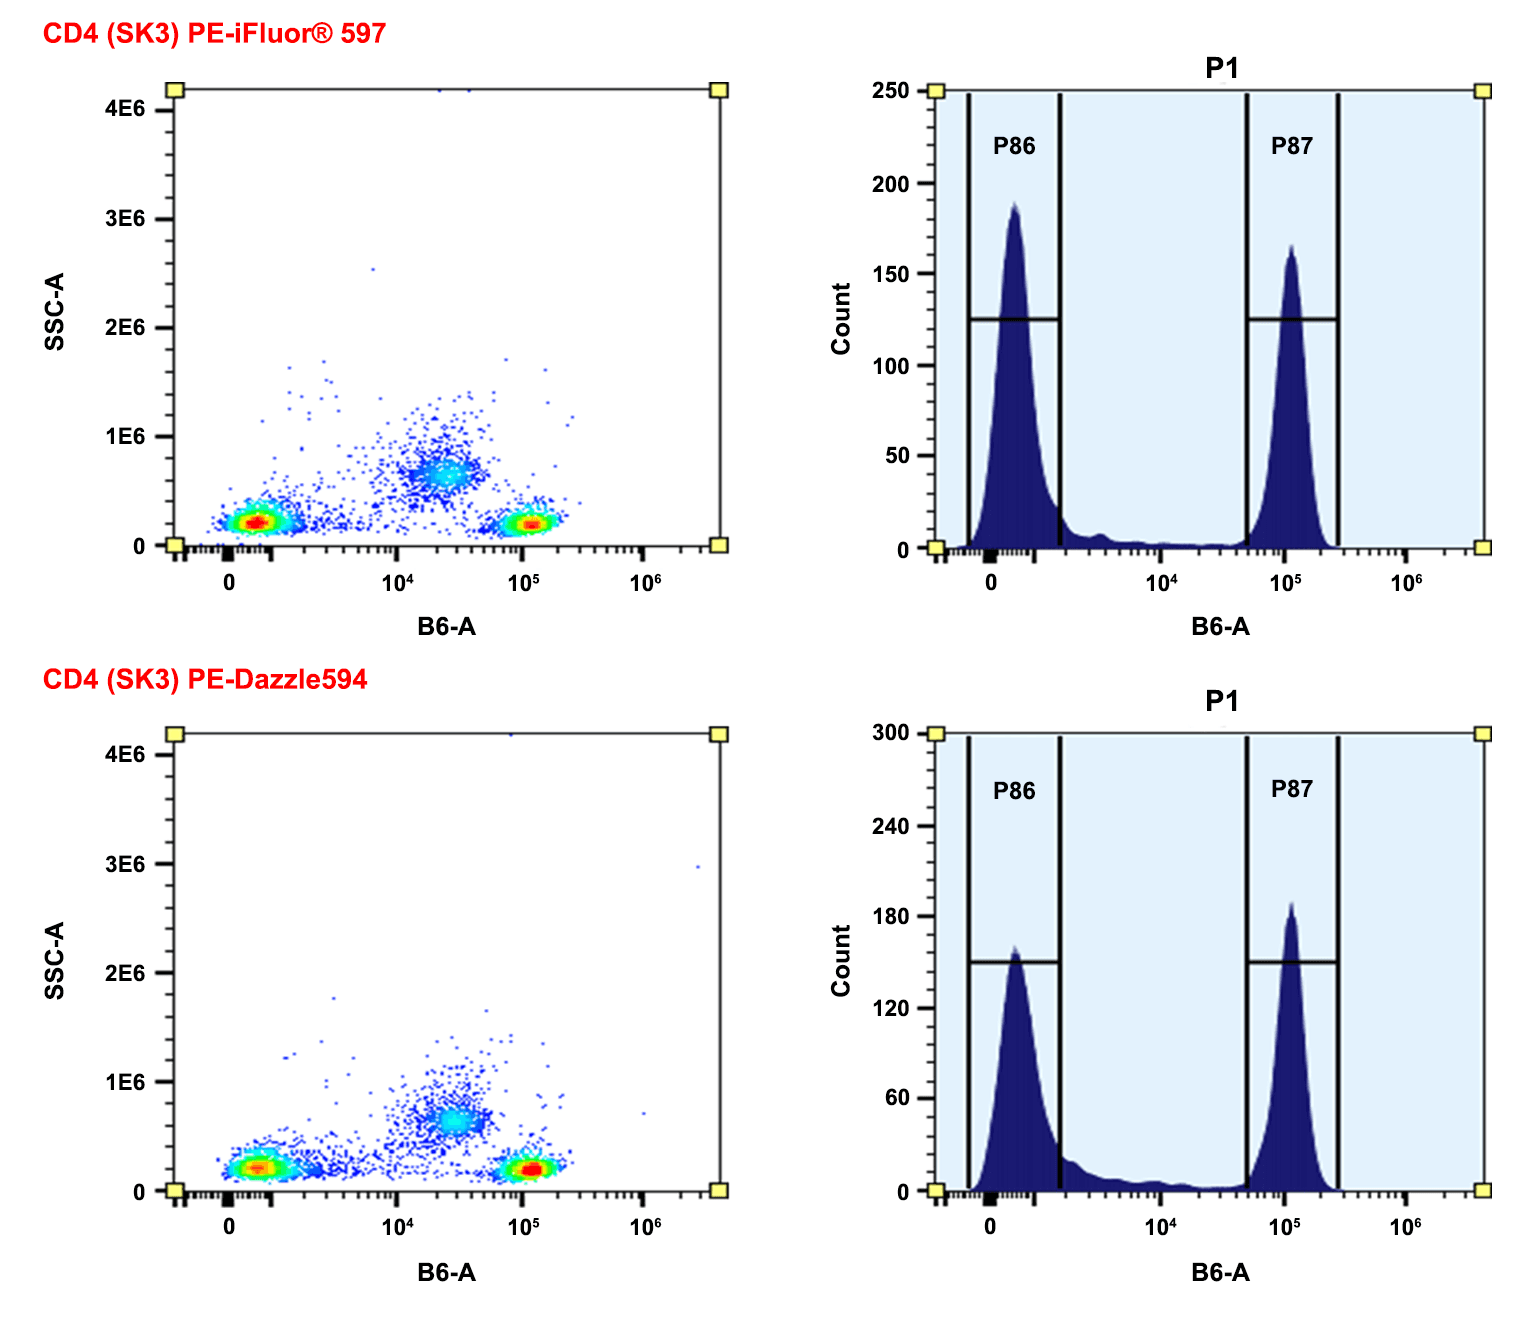 Comparison of CD4+ signal using fluorophore-labeled antibody conjugates. Human peripheral blood mononuclear cells (PBMCs) were isolated and stained using AAT Bioquest PE/iFluor® 597 anti-human CD4 conjugates (top) or Biolegend PE/Dazzle™ 594 anti-human CD conjugates (bottom). The fluorescence signal was monitored using an Aurora flow cytometer in the PE/iFluor® 597 specific B6-A channel.